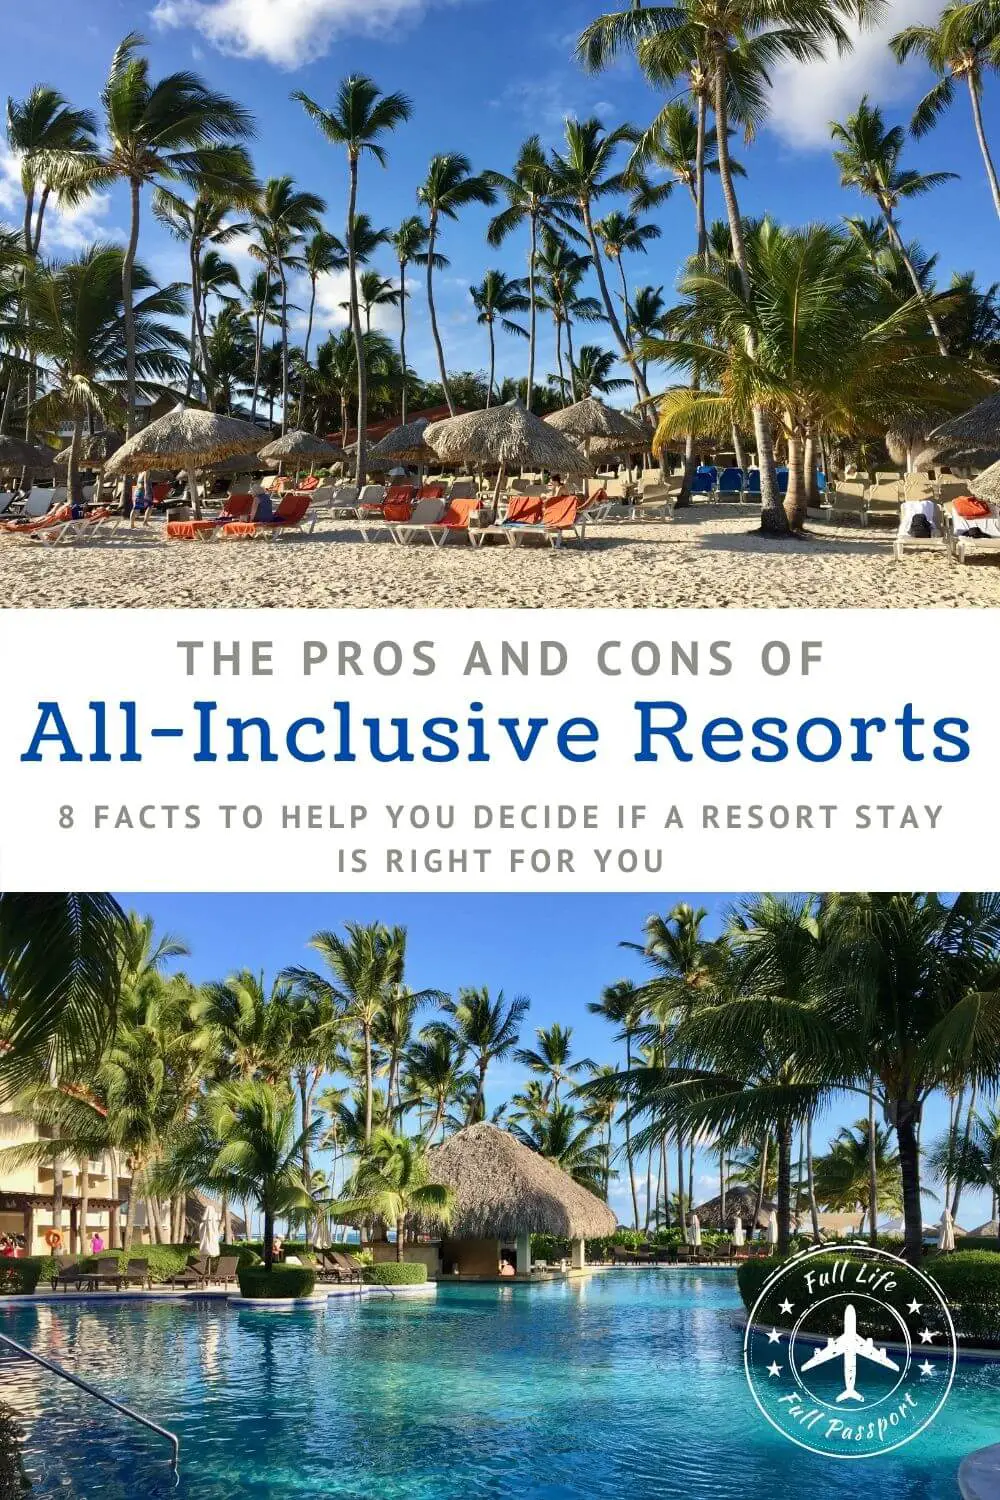 The Pros and Cons of All-Inclusive Resorts